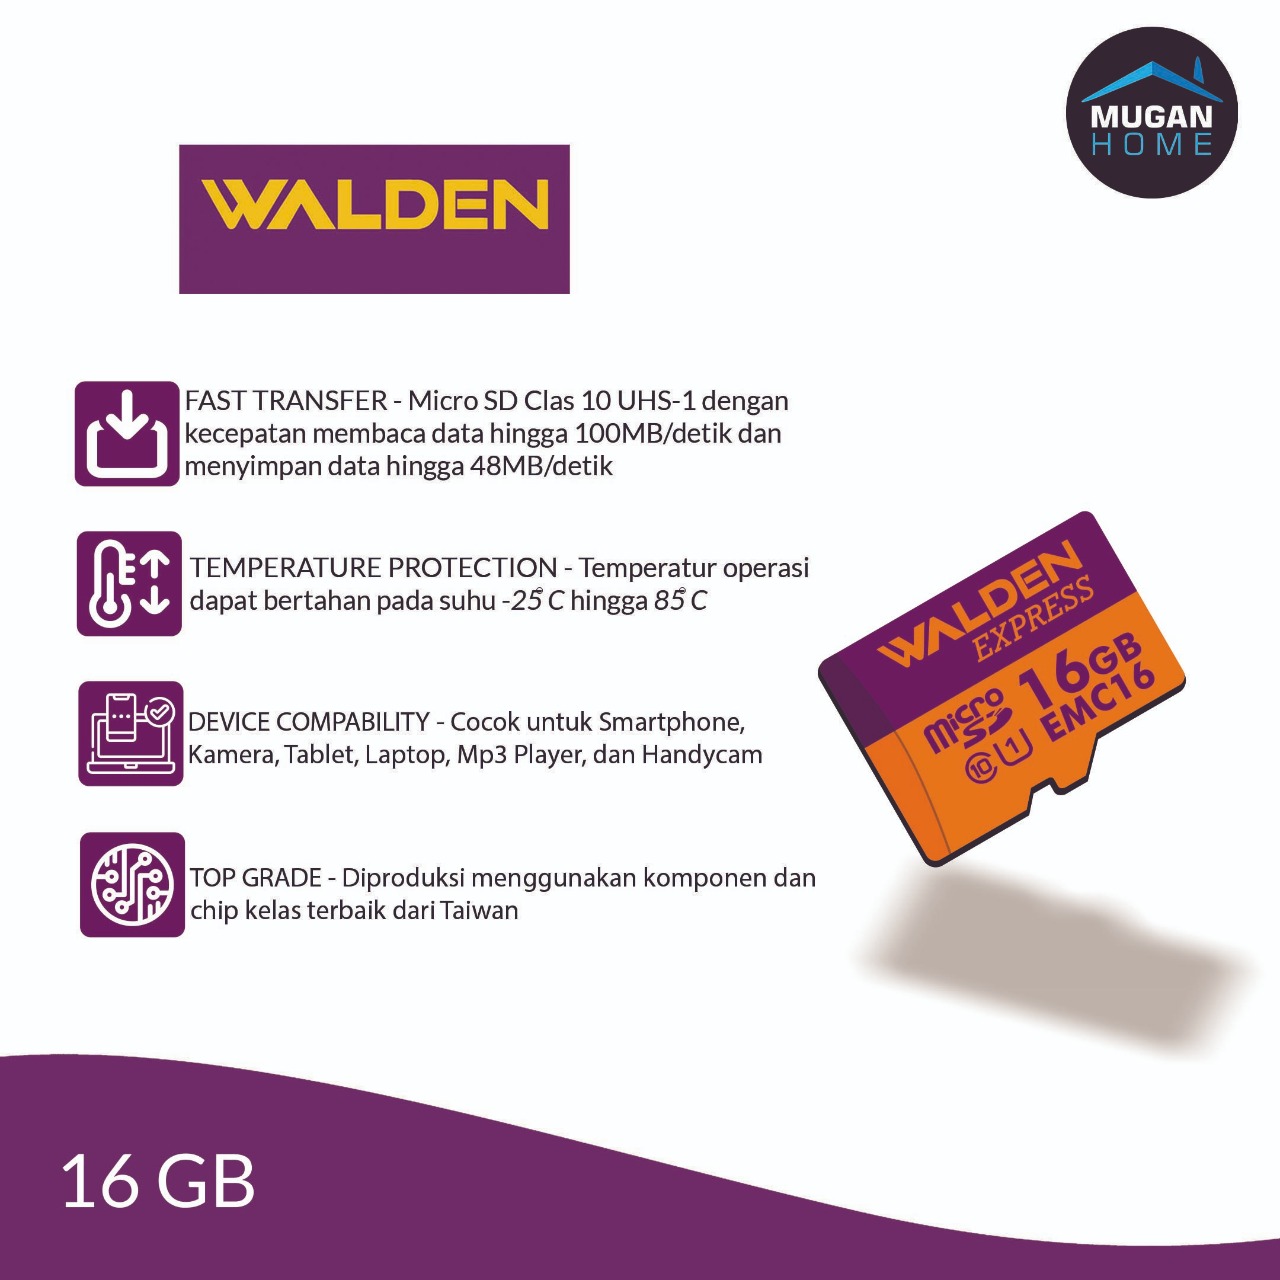 WALDEN EXPRESS MEMORY CARD MICRO SD 16GB 100MBPS